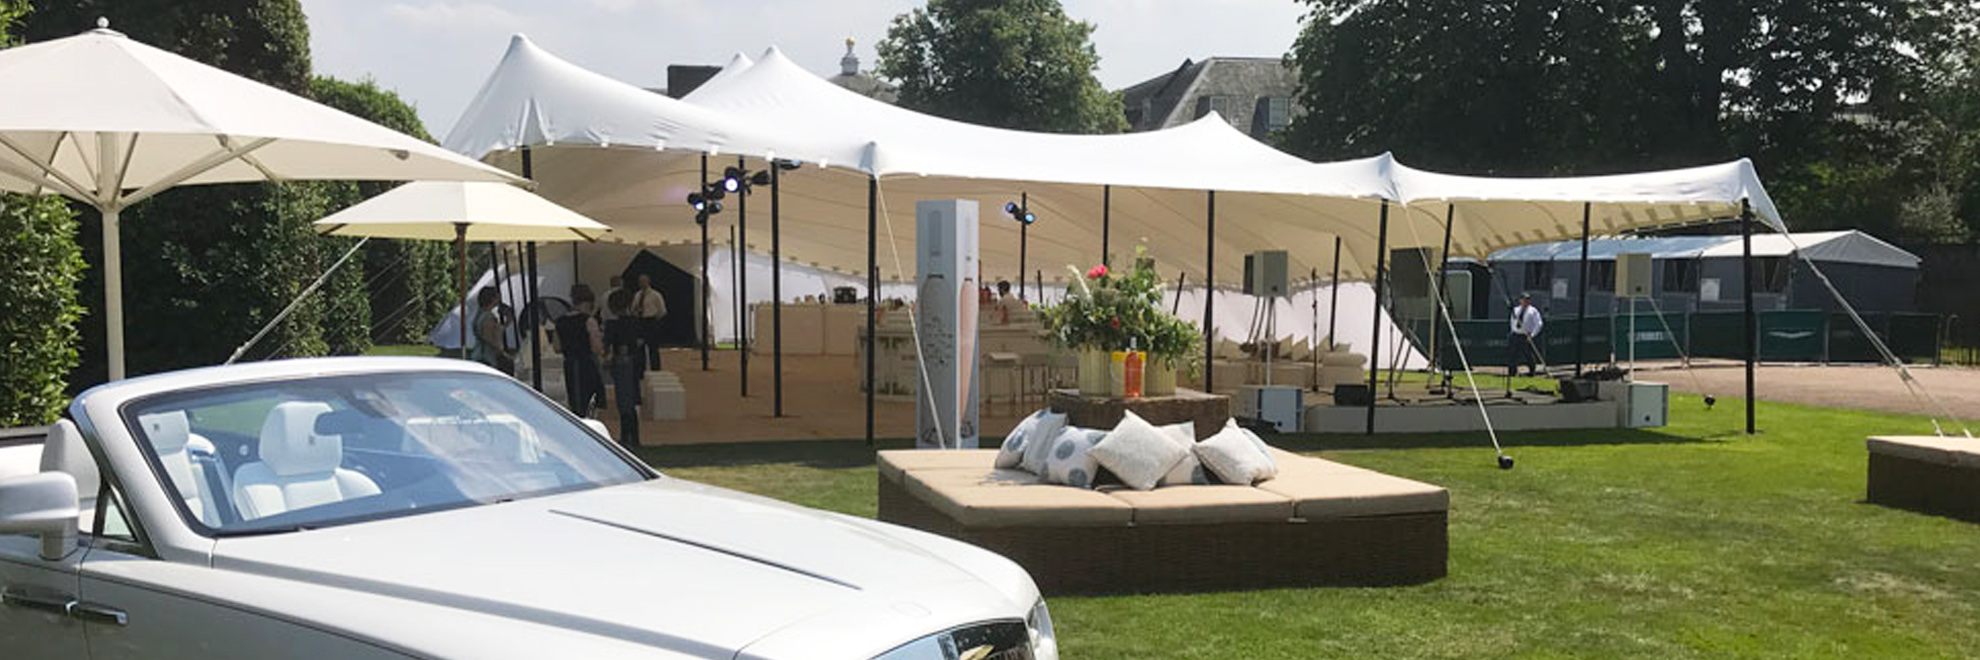 White stretch tent with wicker sofa and bentley in foreground